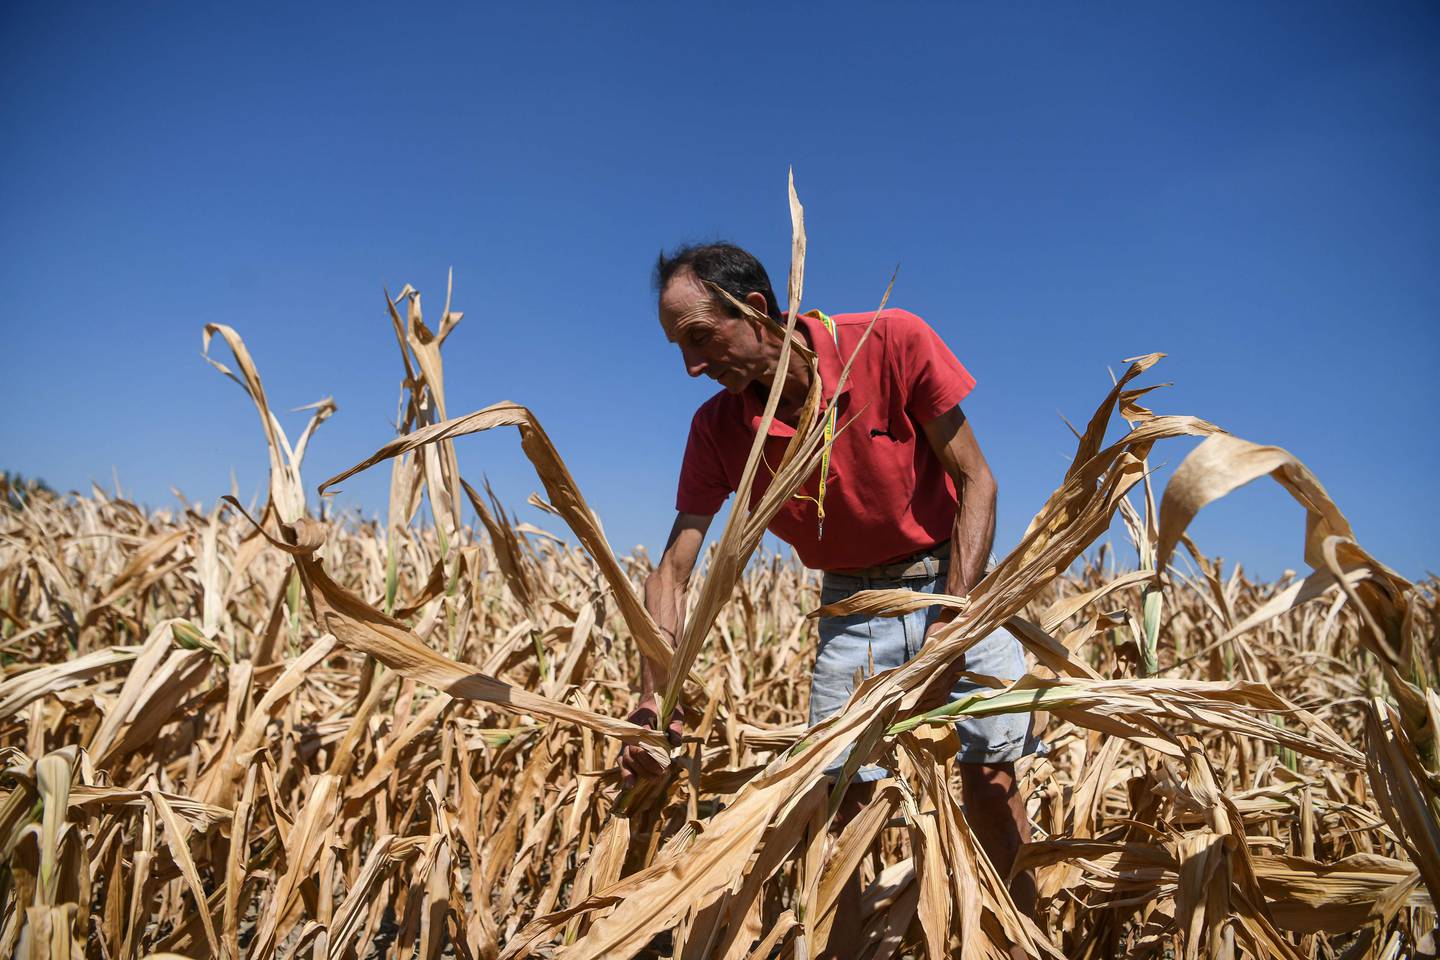 Farmer Achille Crespiatico assesses damage to his cornfield from severe drought in Spino d'Adda, Italy. AFP